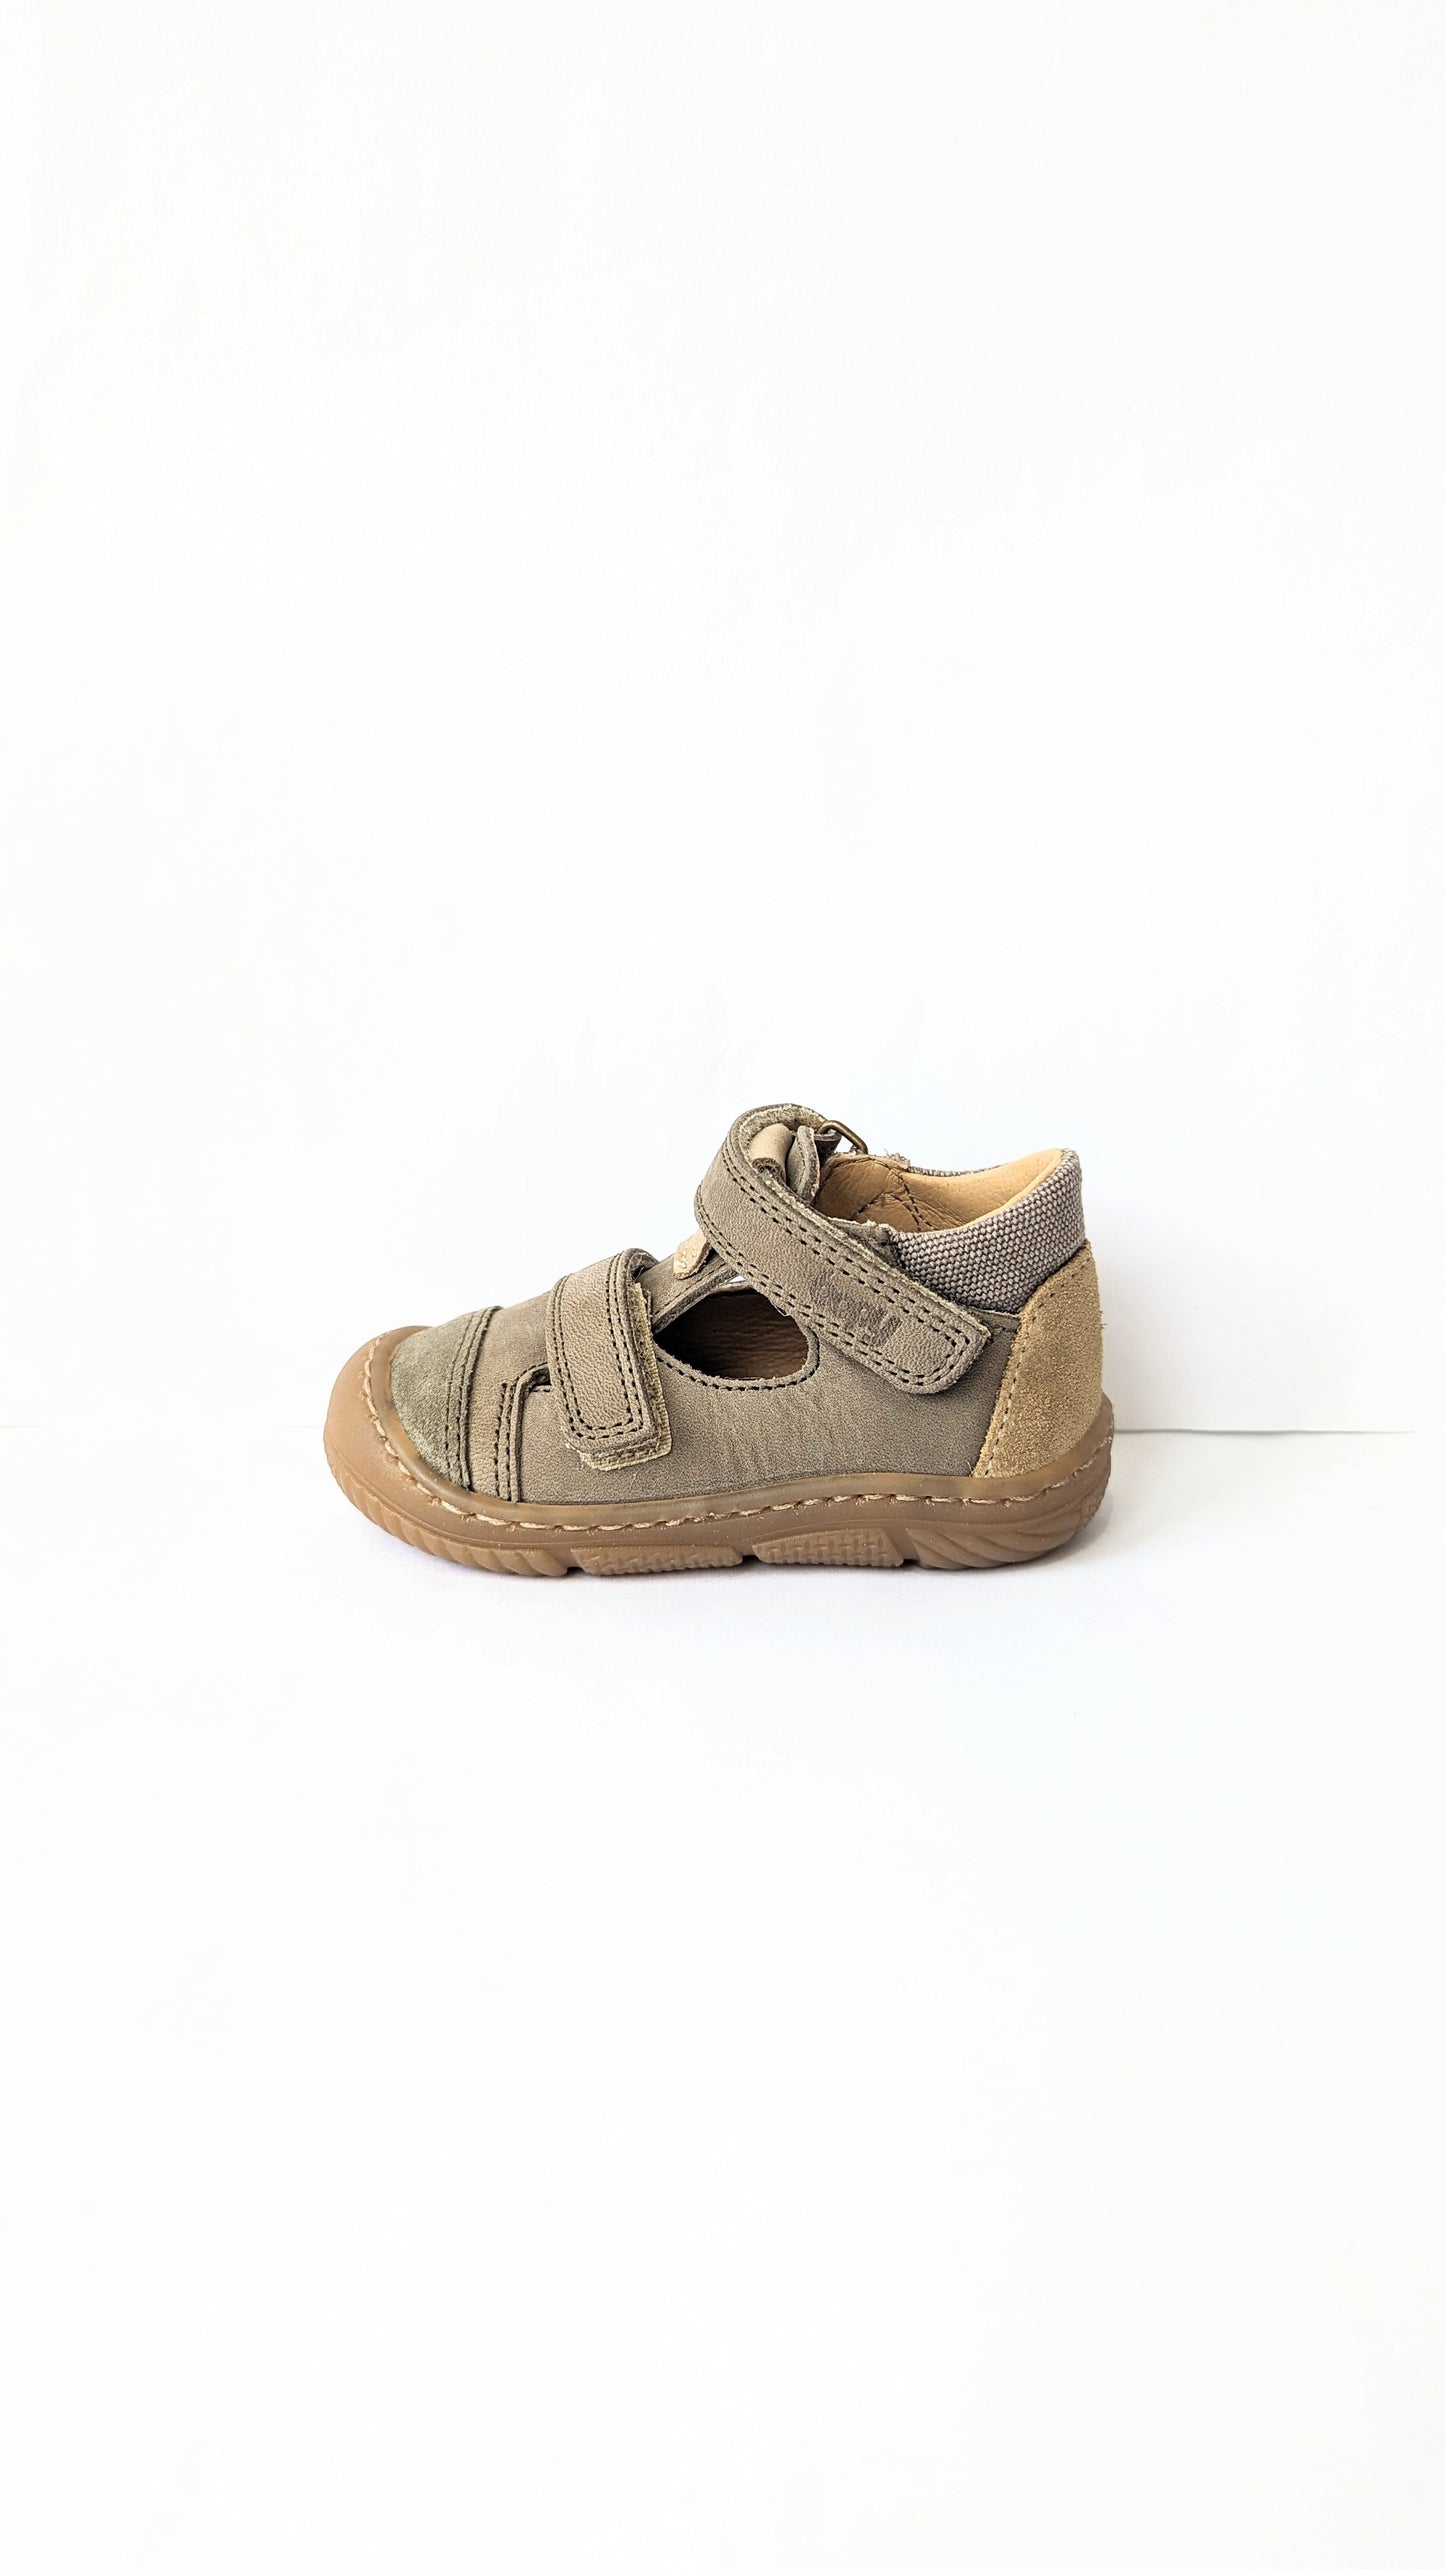 A boys shoe by Bopy, style Jacour, in khaki nubuck with double velcro fastening and toe bumper.  Right side view.